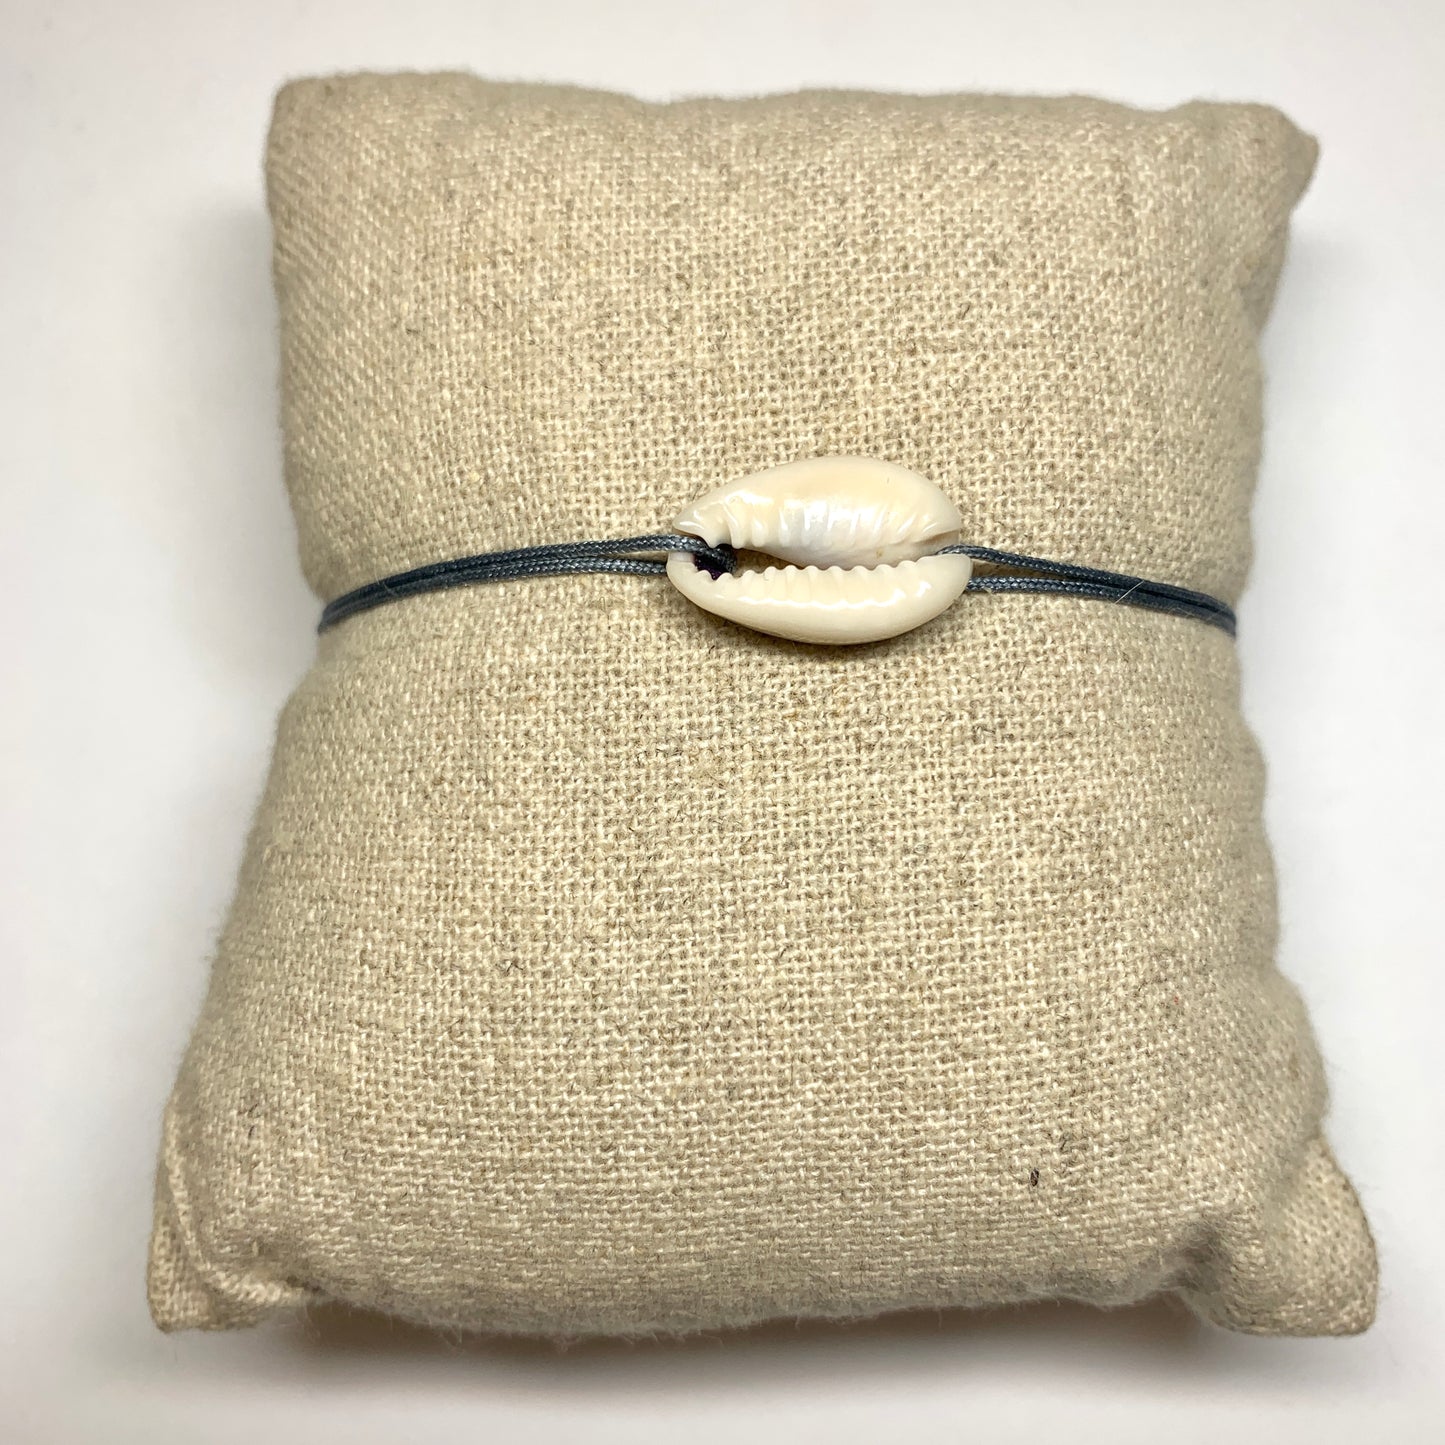 natural cauri shell bracelet handcrafted in France